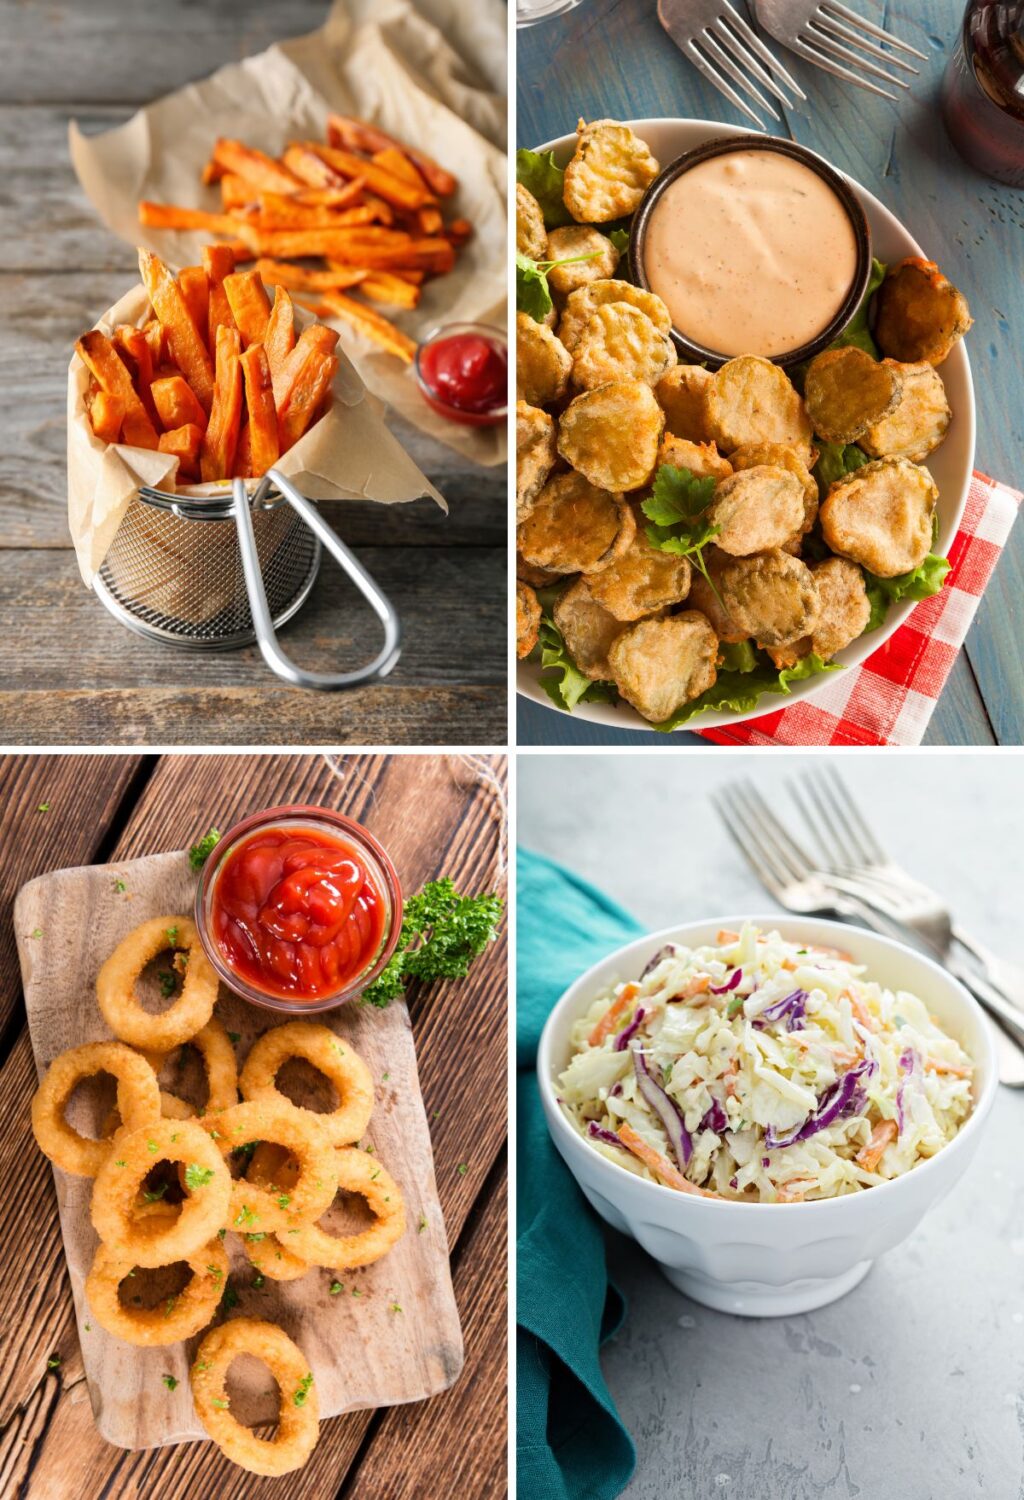 A collage of pictures of different foods, including fries, onion rings, and ketchup.